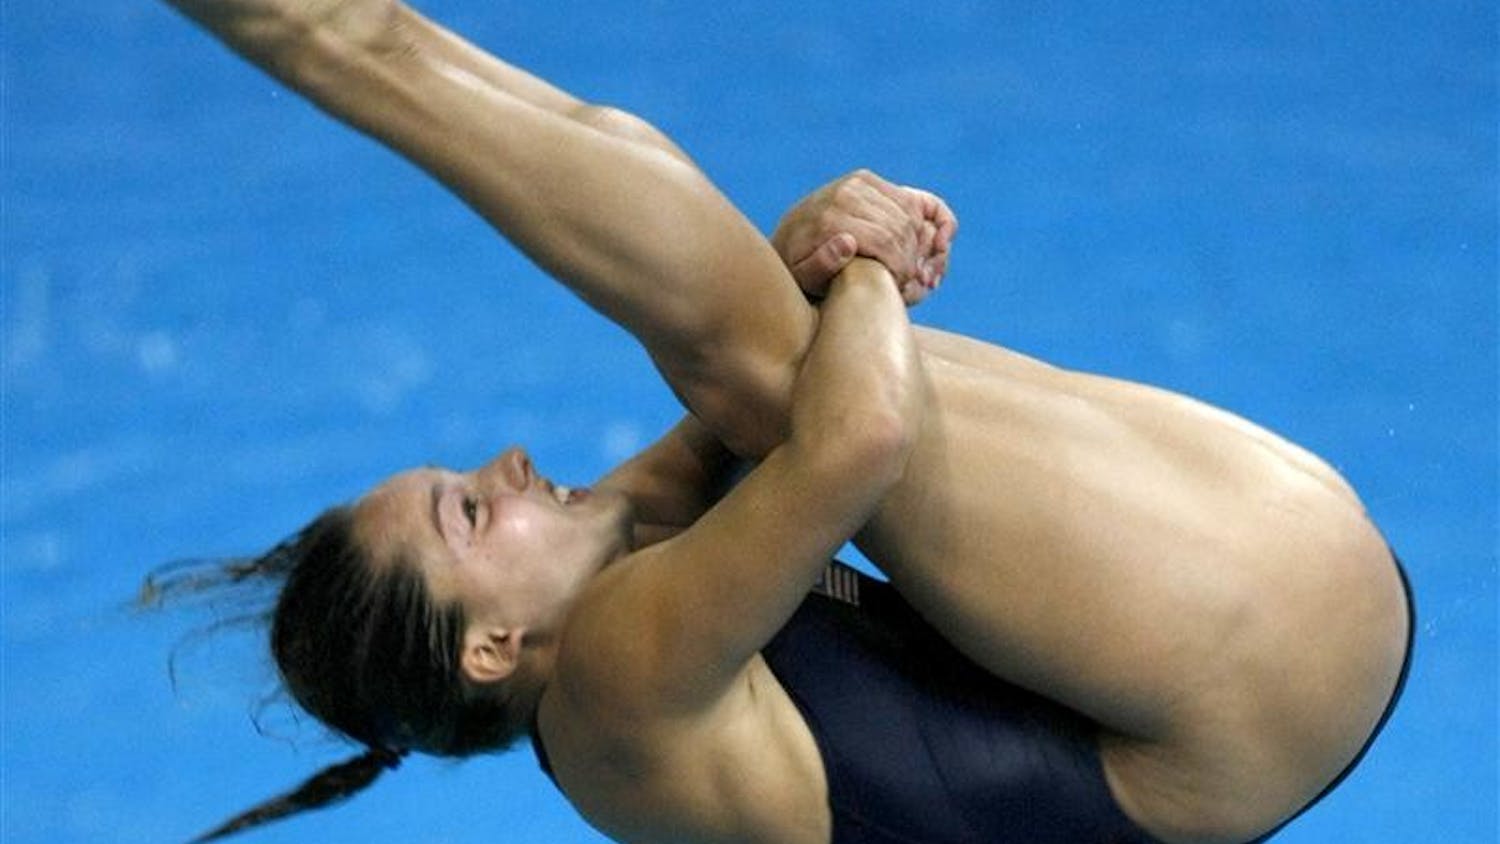 USA's Christina Loukas of Riverwoods, Illinois, does a forward 3-1/2 somersault dive while competing in the women's 3M Springboard finals on Sunday, August 17, 2008, in the Games of the XXIX Olympiad in Beijing, China.